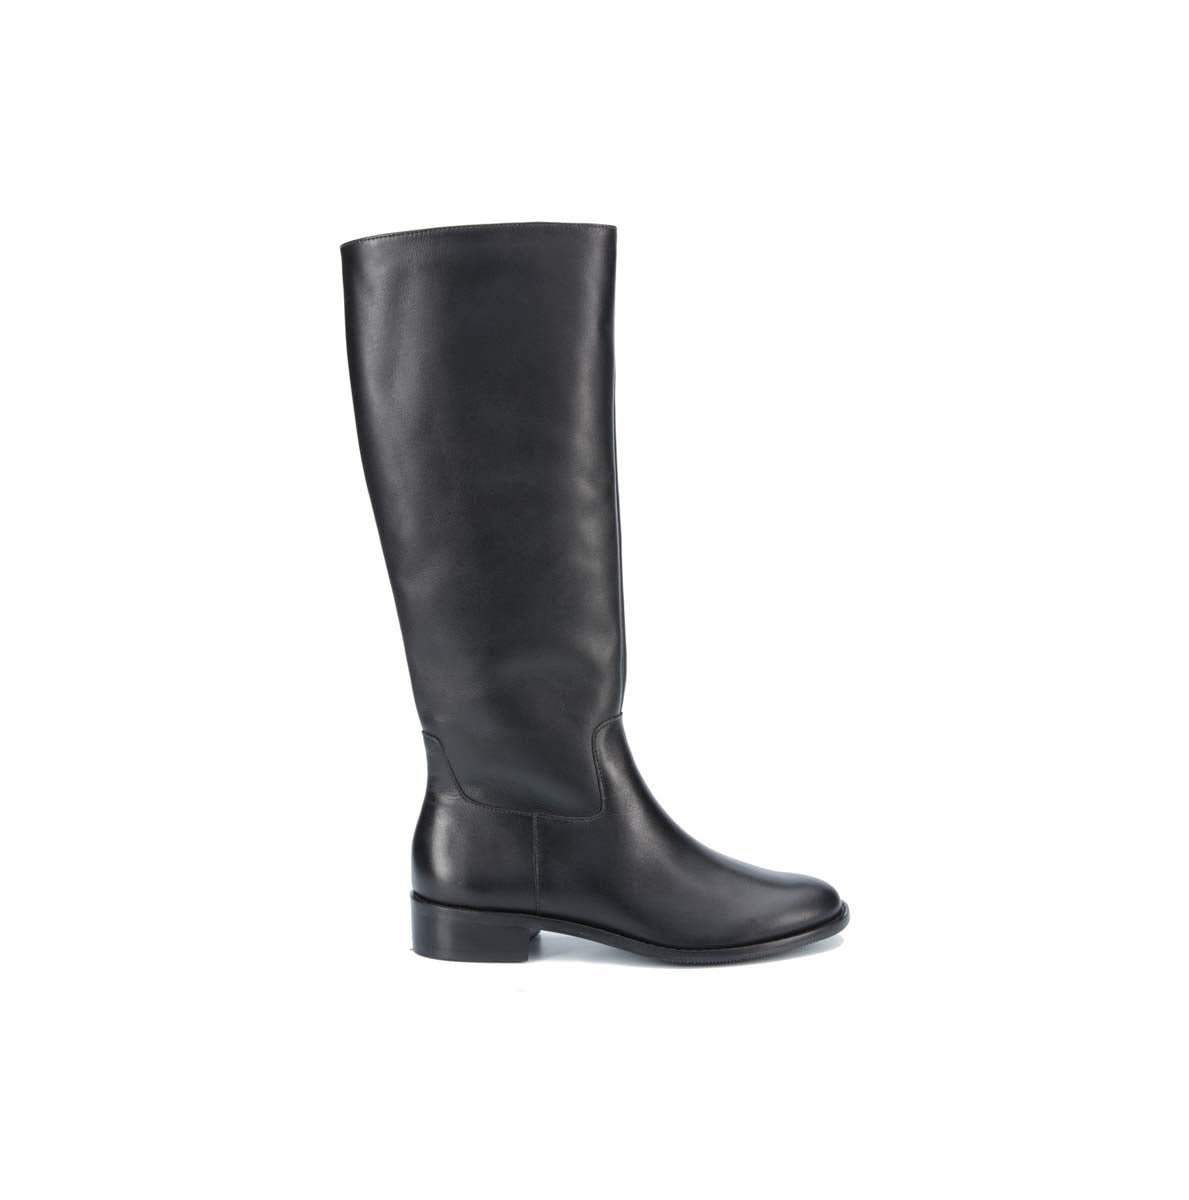 WALKING CRADLES WC MEADOW-W WOMEN RIDING BOOT IN BLACK CASHMERE LEATHER - TLW Shoes